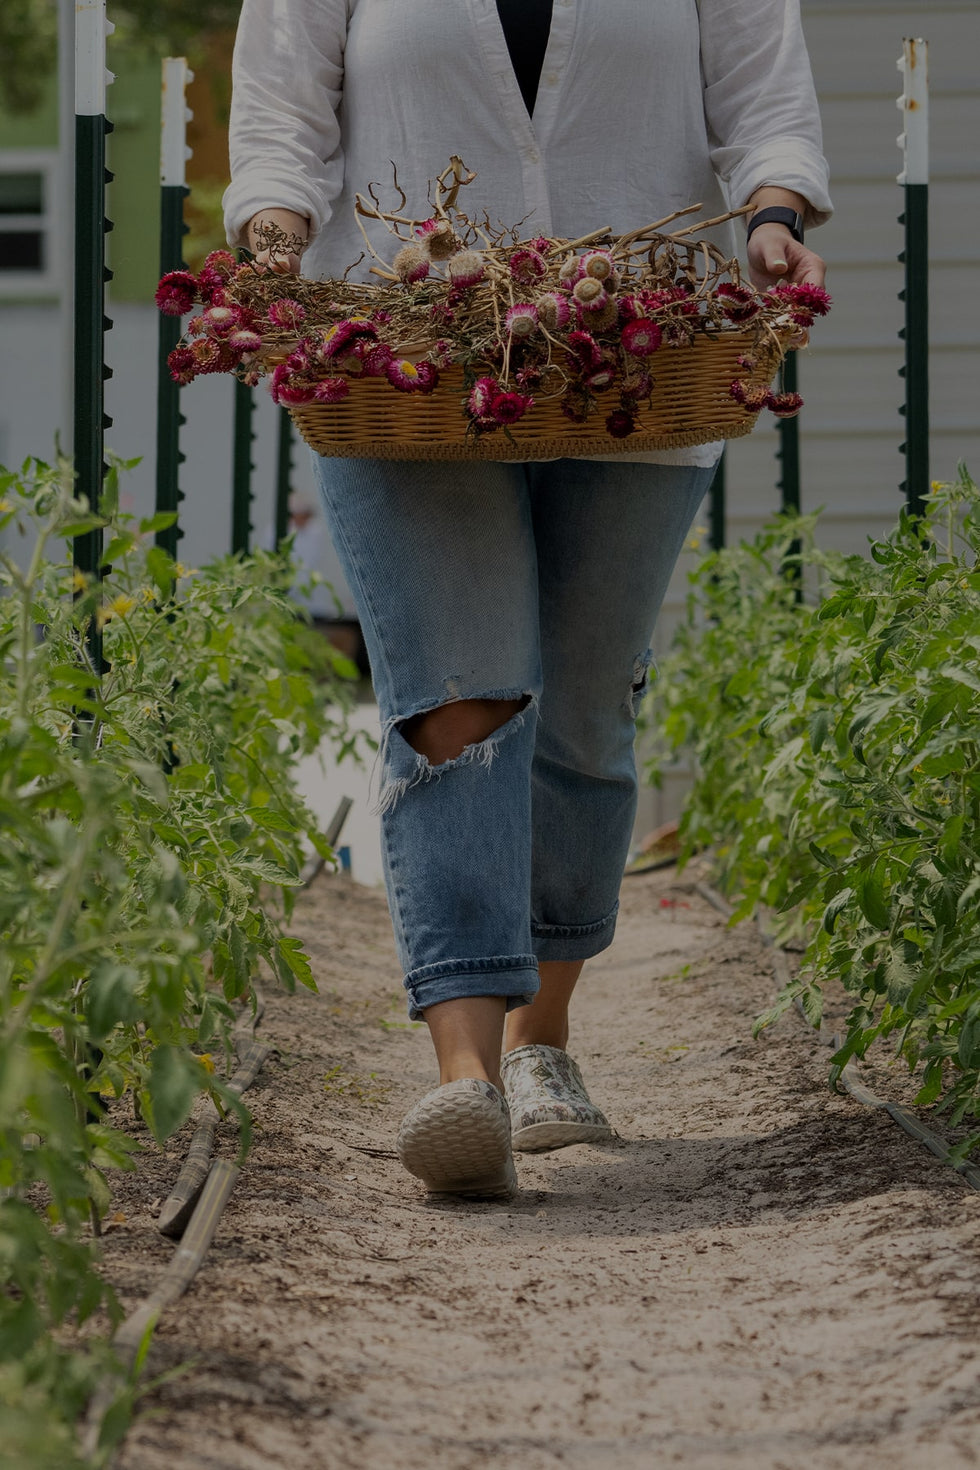 Woman wearing a pair of floral Muck Boots clogs walking down a garden path with dead flower heads in a wicker basket